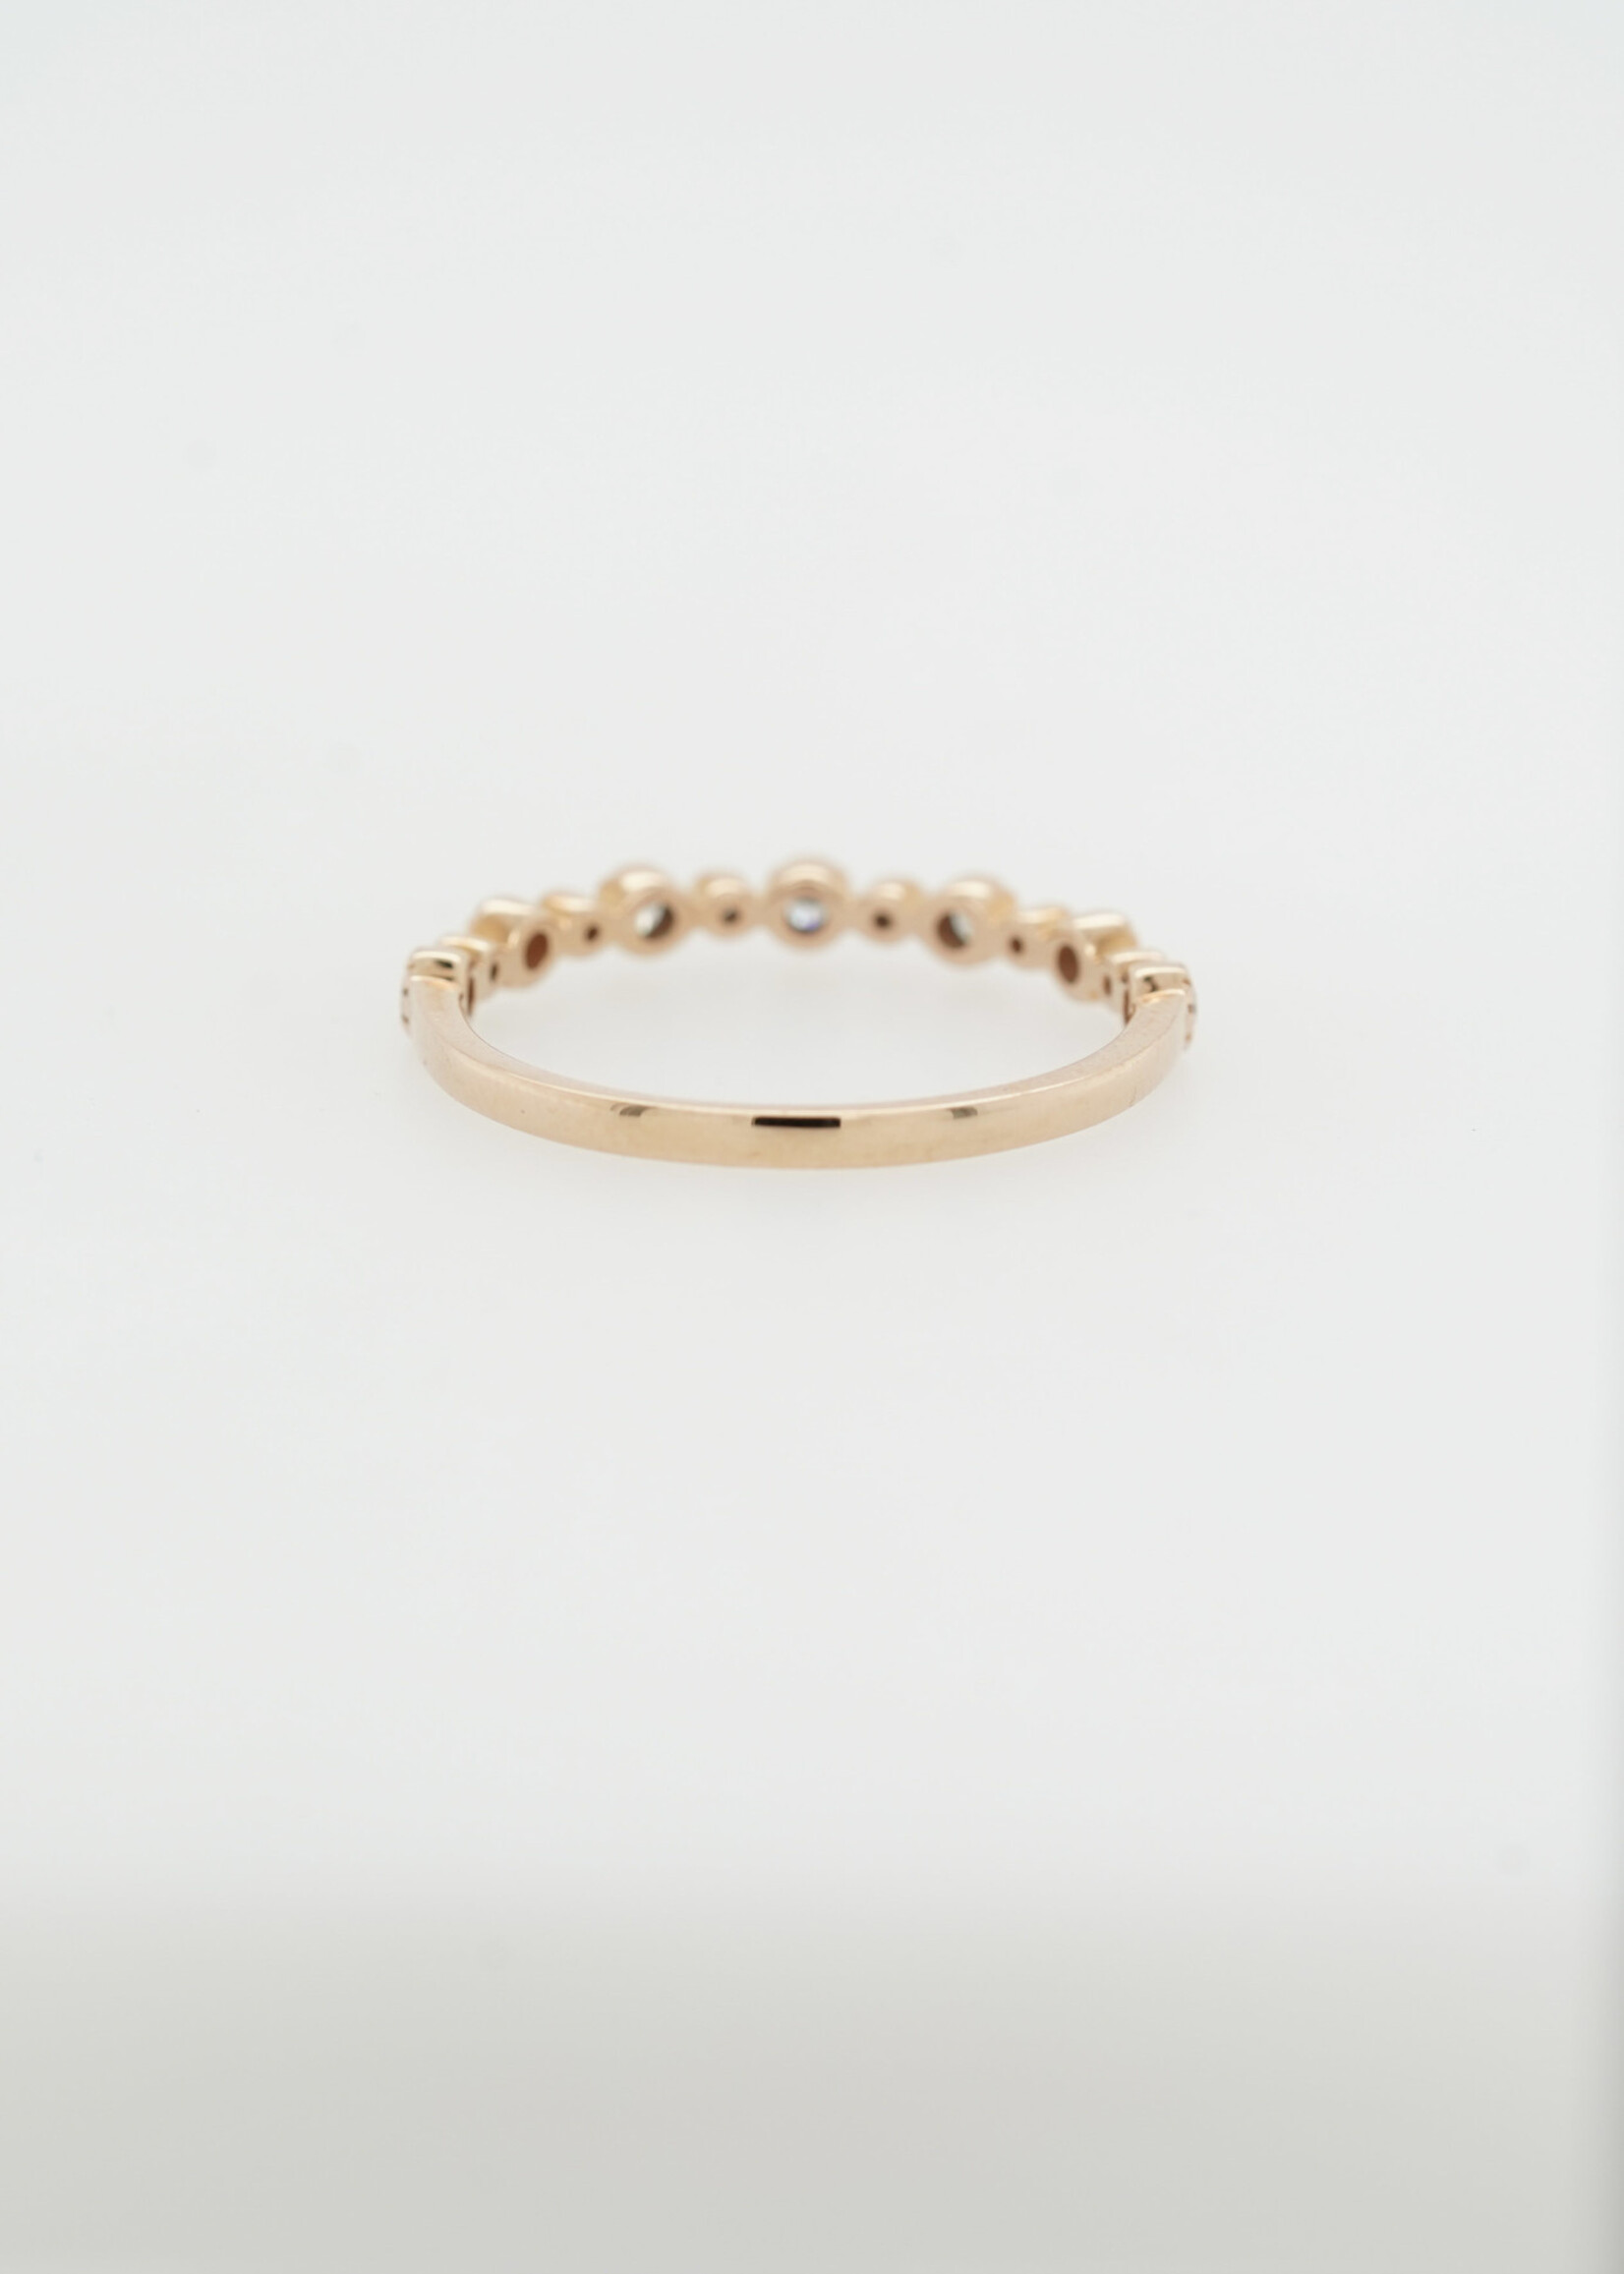 18KR 1.4g .19ctw Diamond Stackable Band (size 6.5)